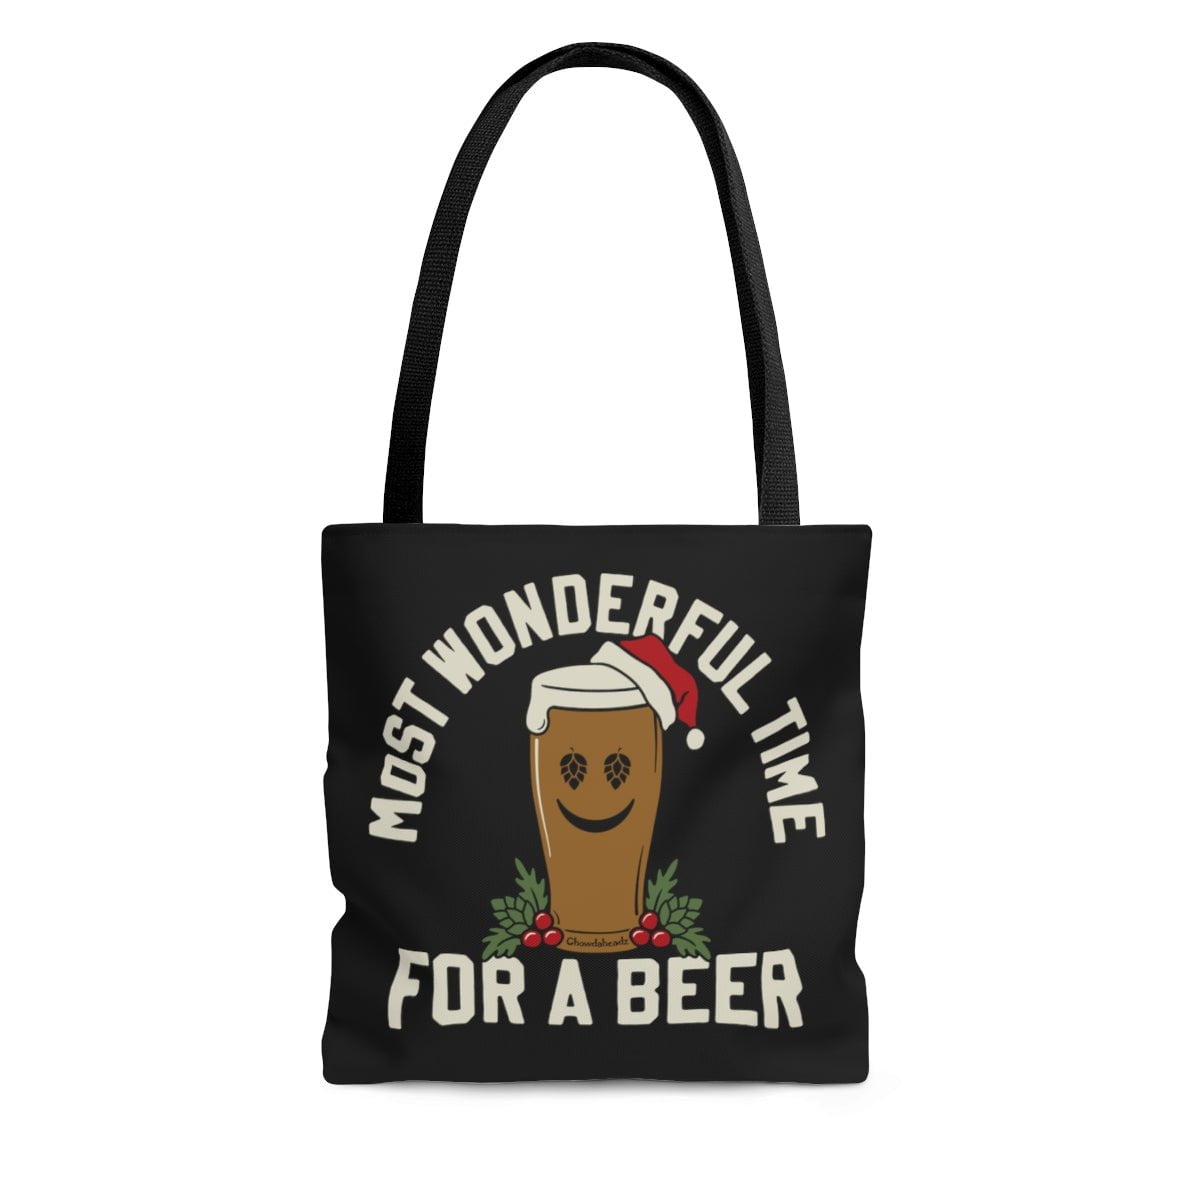 Most Wonderful Time For A Beer Tote Bag - Chowdaheadz